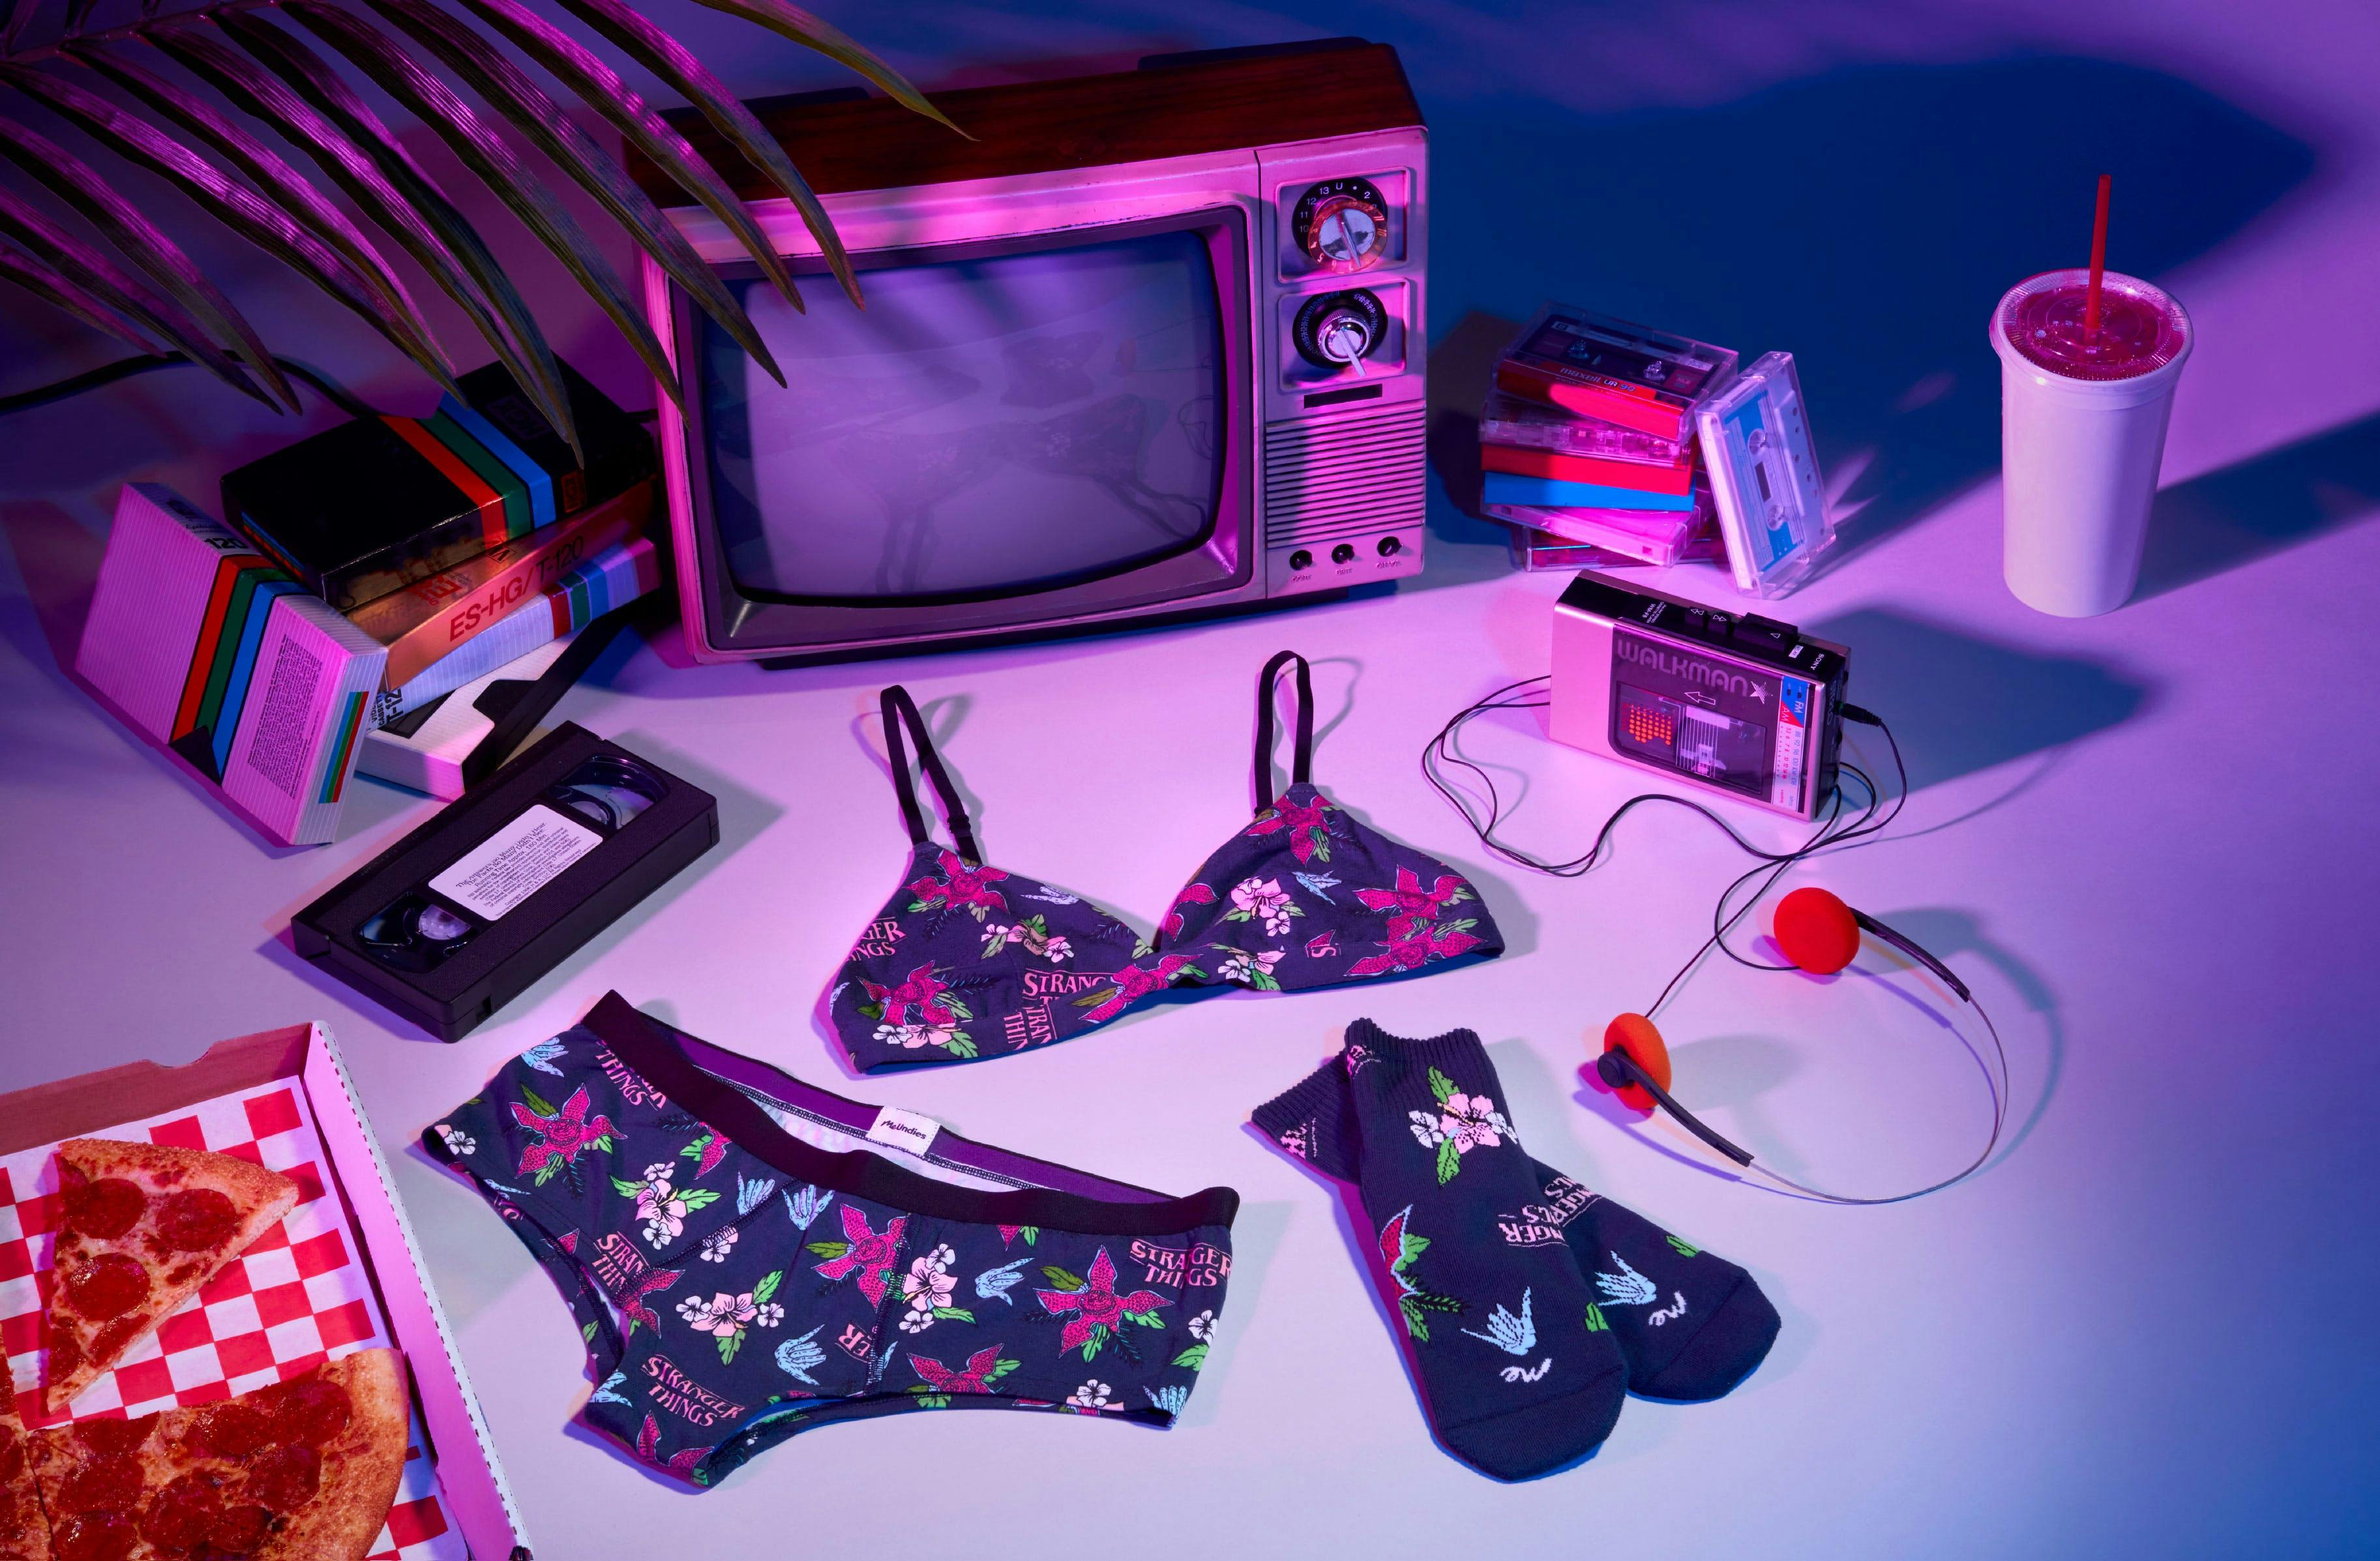 flay-lay photography with a tv, pizza, undergarments and socks, cool tones 